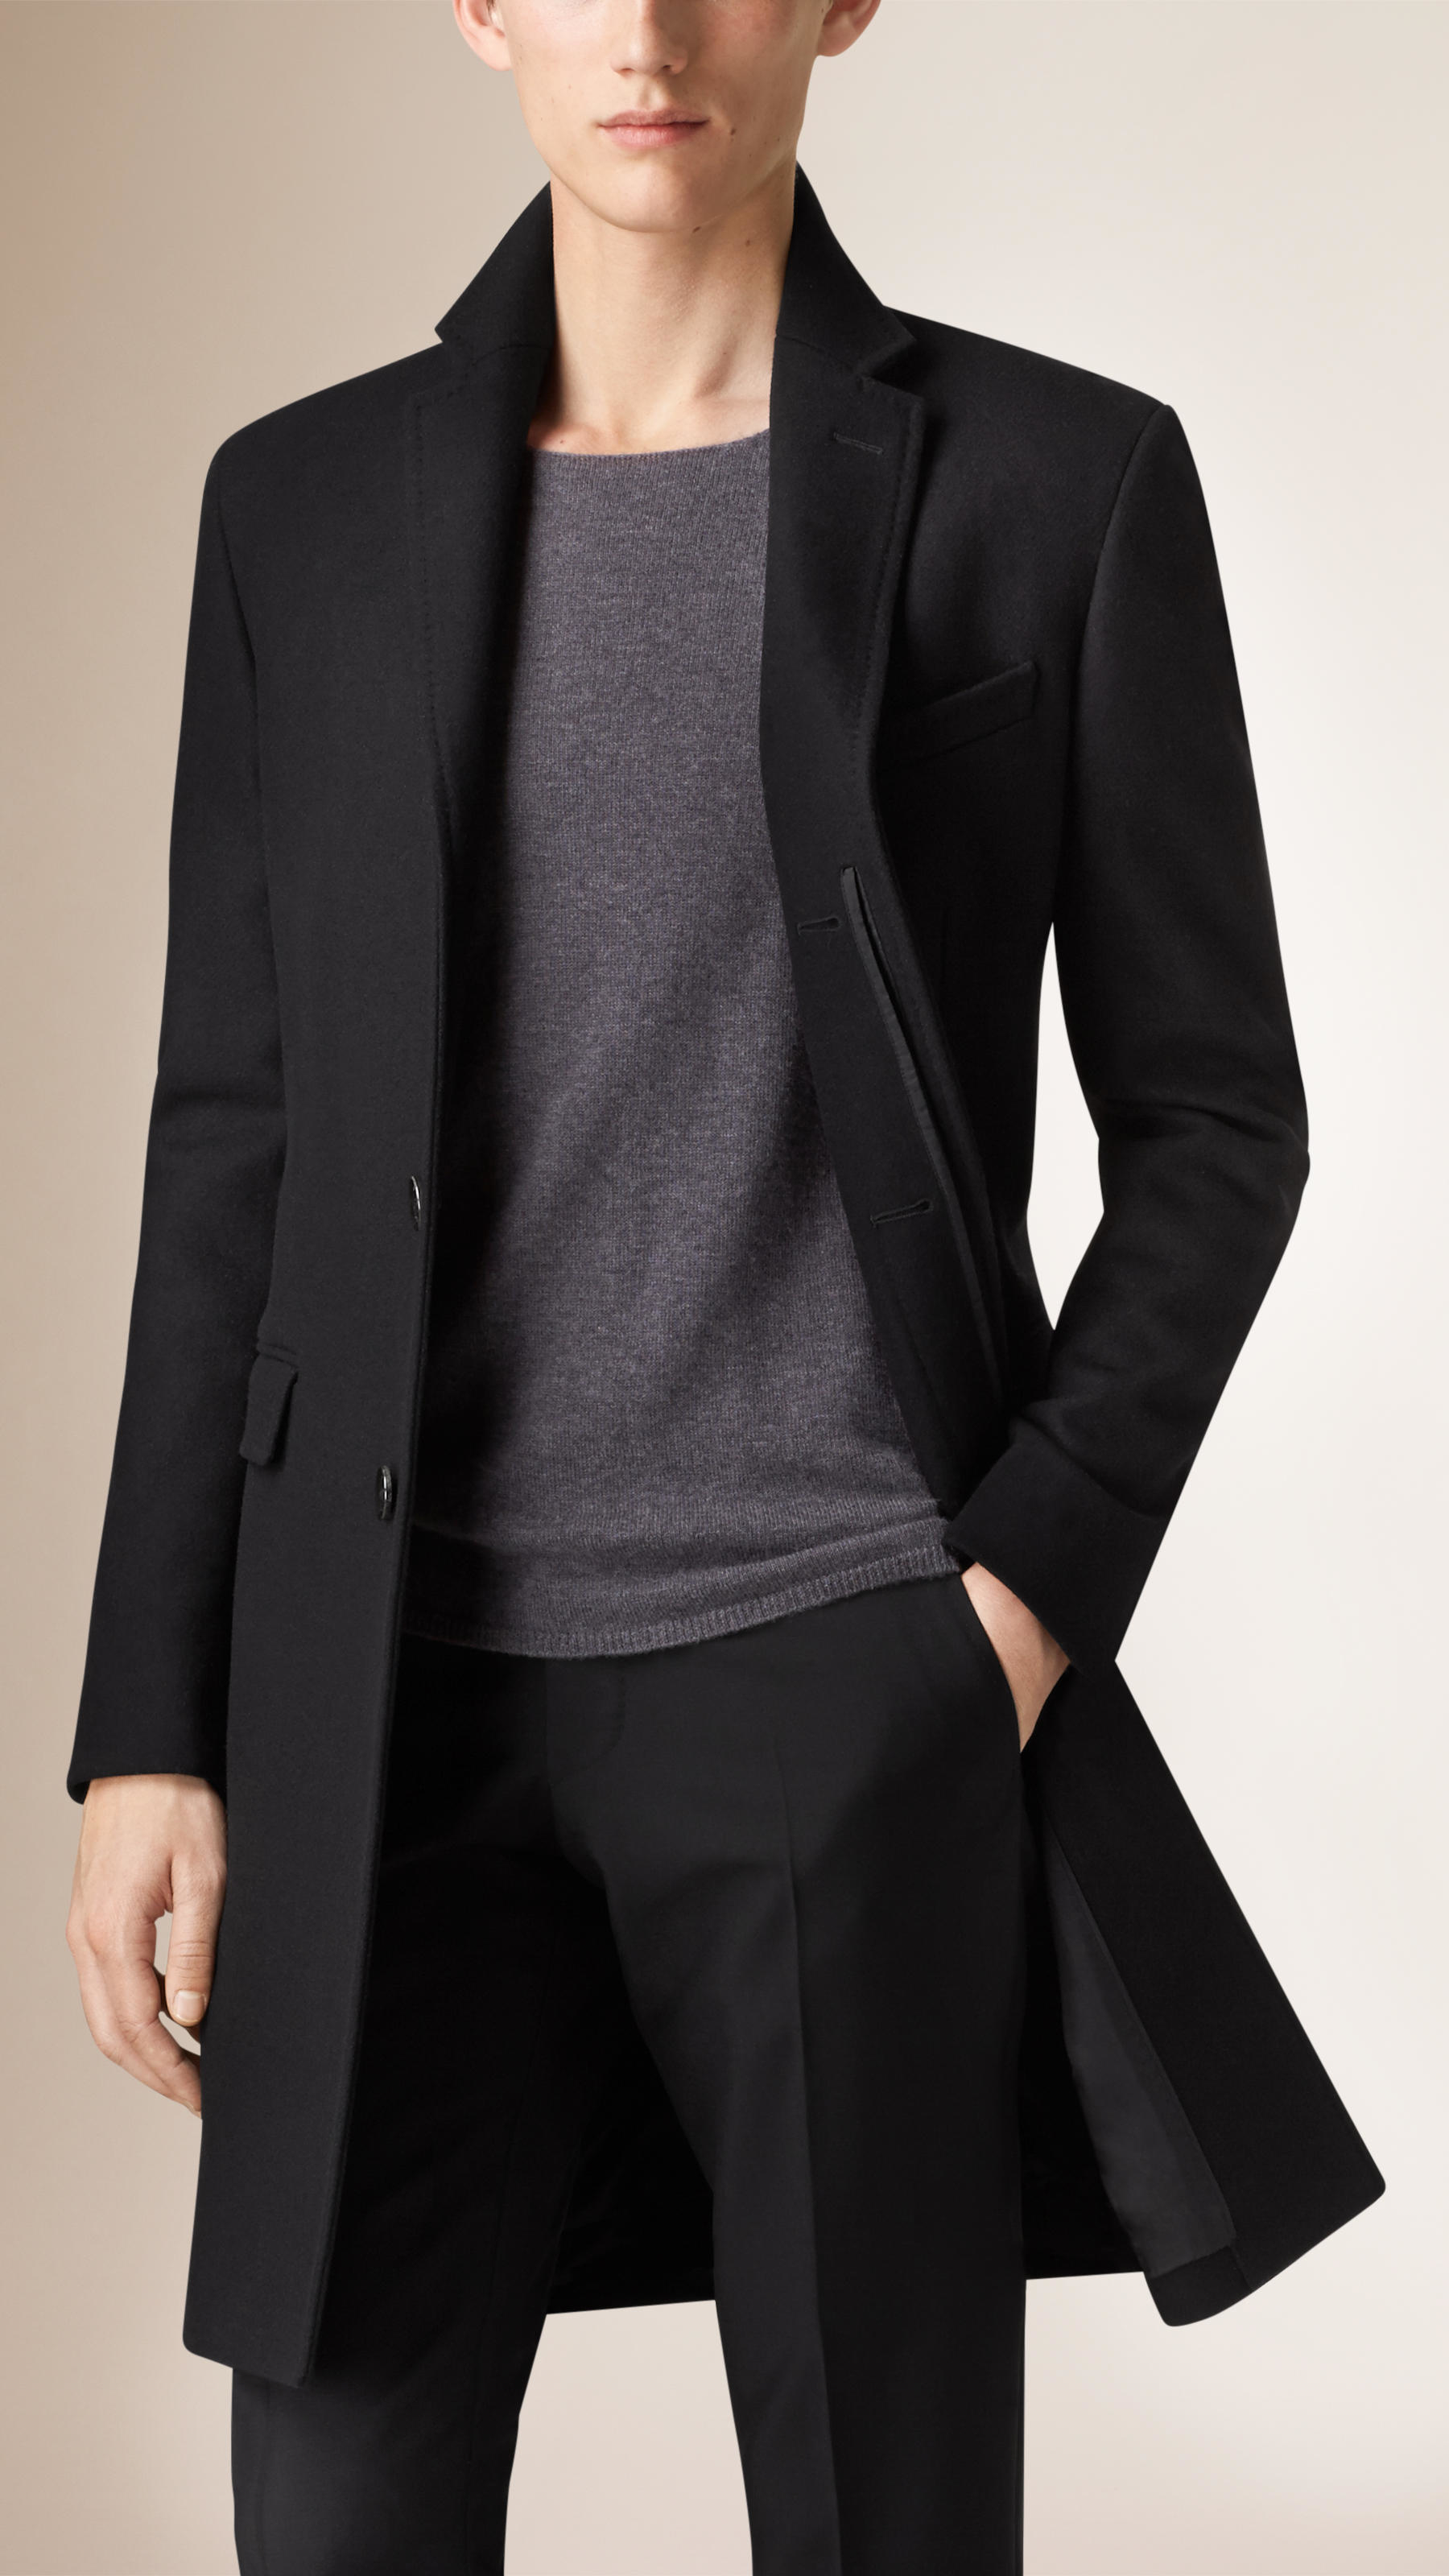 Burberry Wool Cashmere Topcoat in Black for Men - Lyst